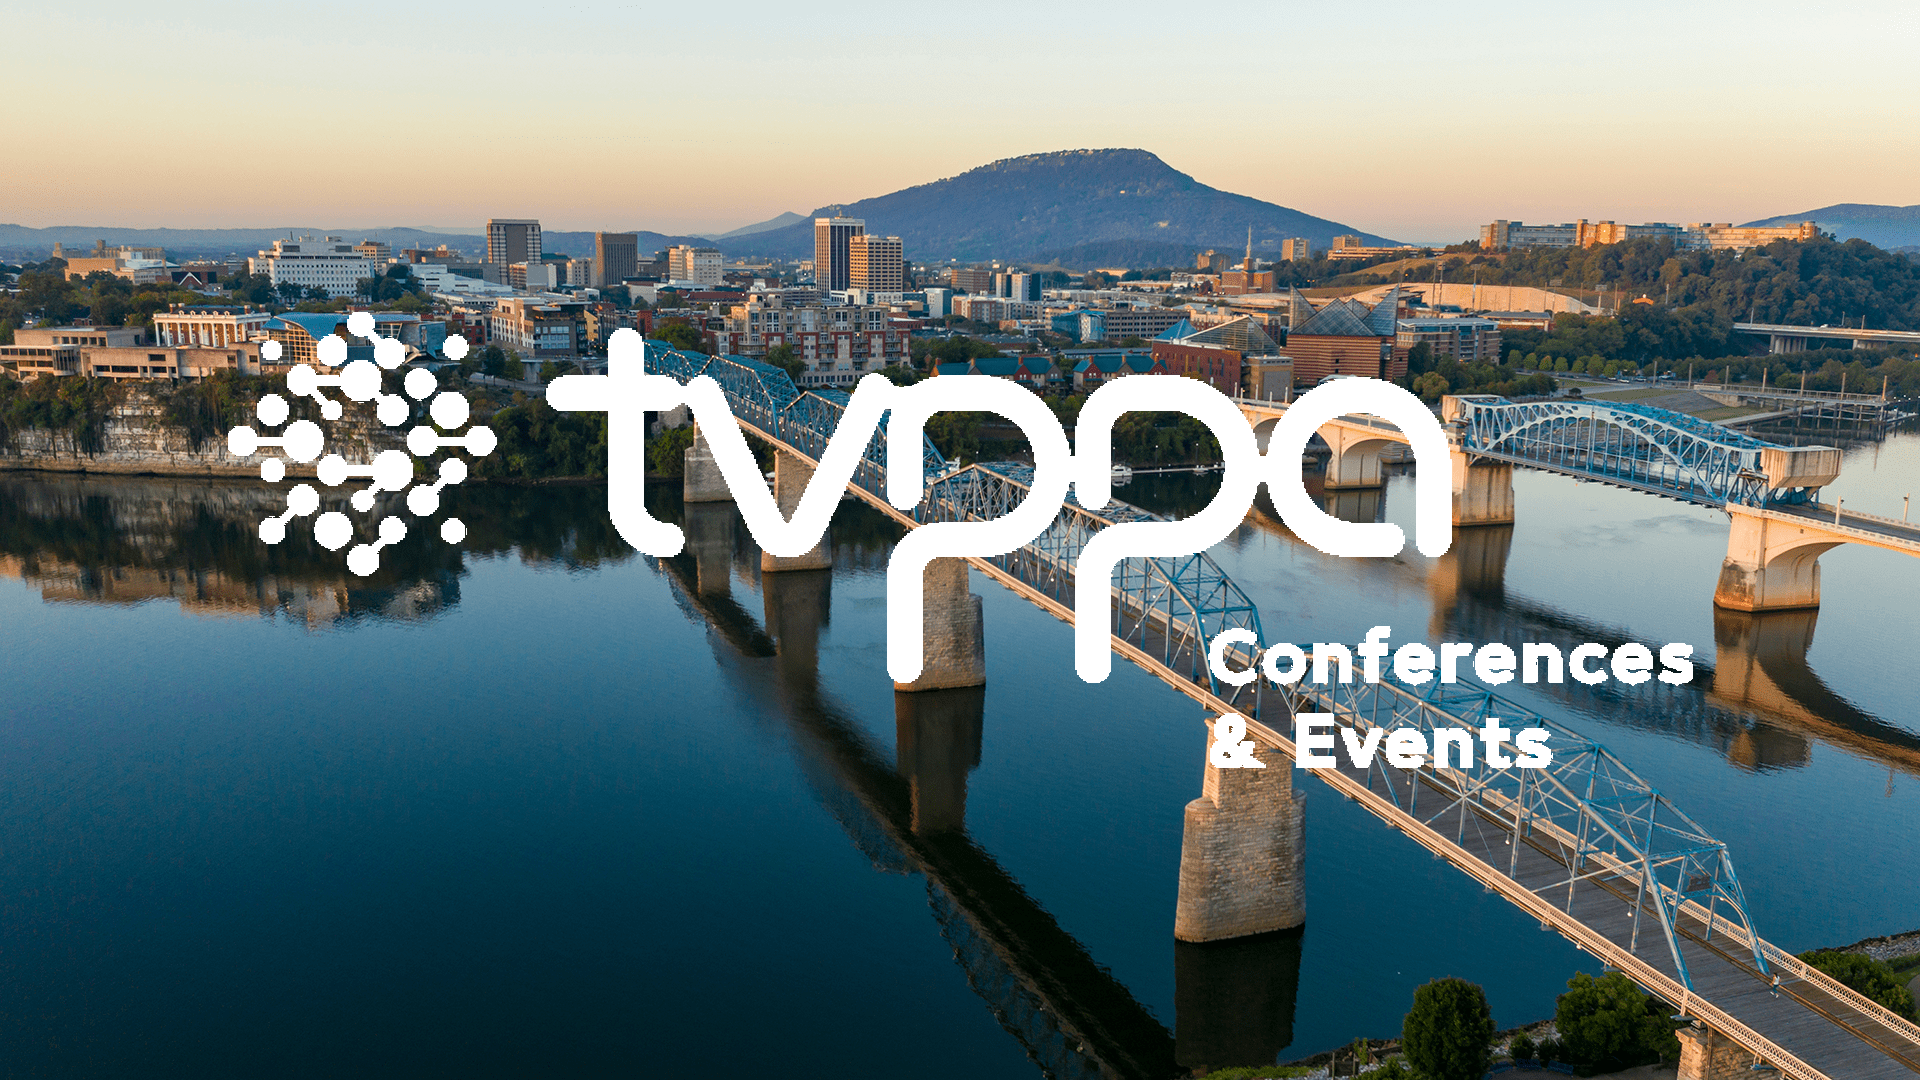 TVPPA Engineering, Operations & Technology Conference, Chattanooga, TN